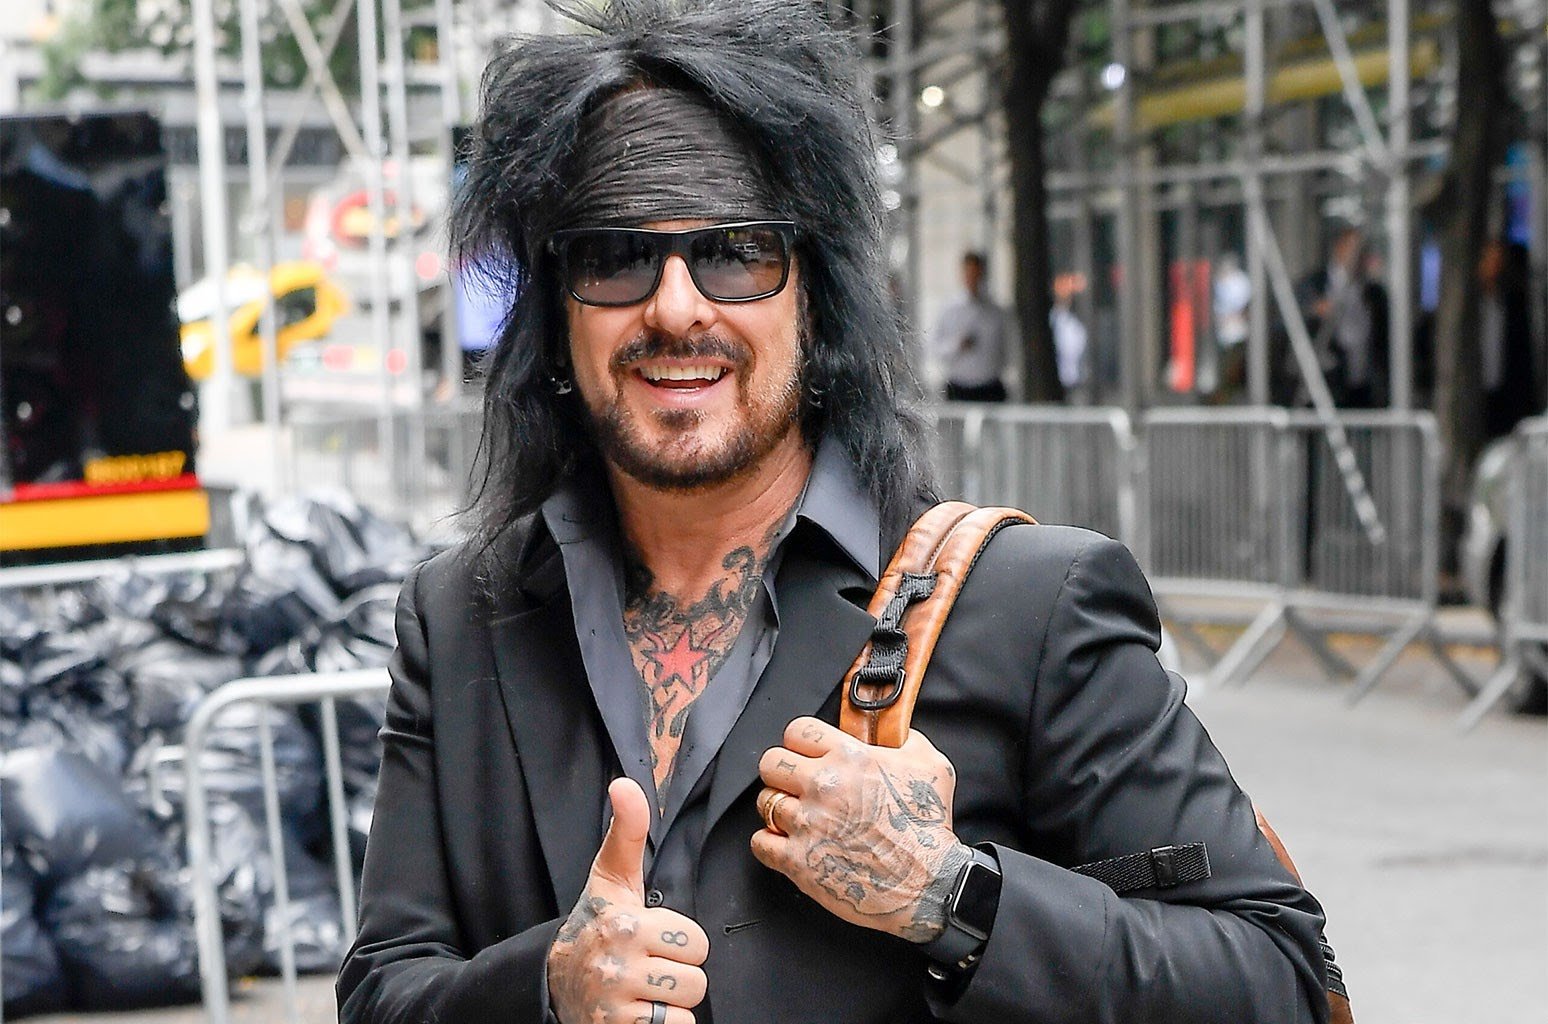 Nikki Sixx S Sixx A M Assembles Rock Country Metal All Stars For A Great Cause Global Recovery Initiatives Foundation O r g intro g chorus g maybe it's time to let the old ways die c g maybe it's time to found any corrections in the chords or lyrics? nikki sixx s sixx a m assembles rock